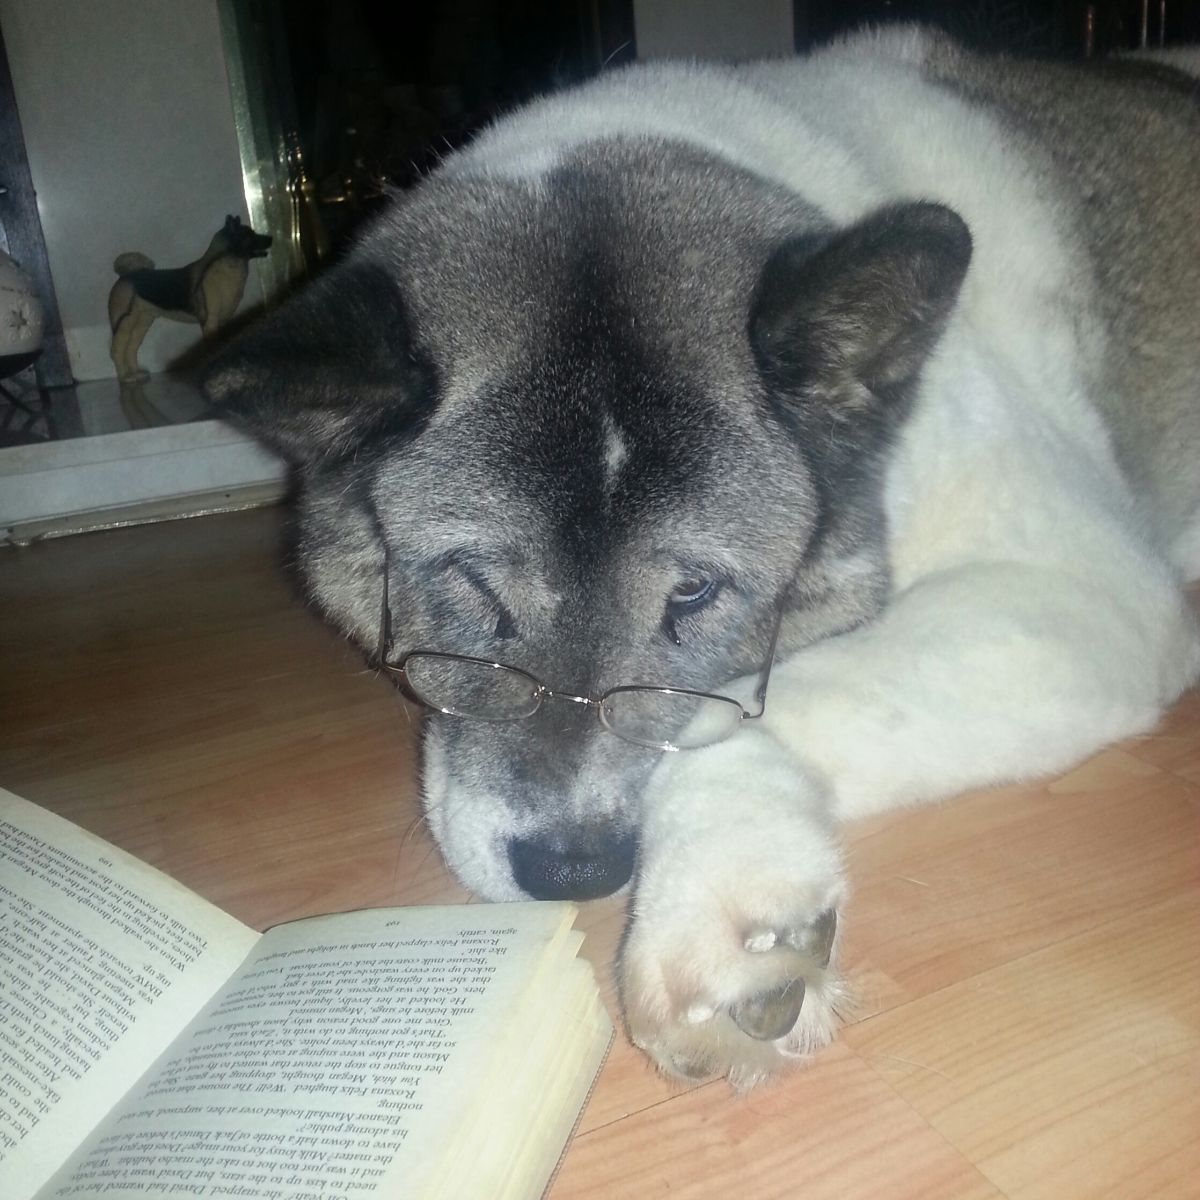 old black and white dog wearing glasses gone askew laying on a table in front of an open book